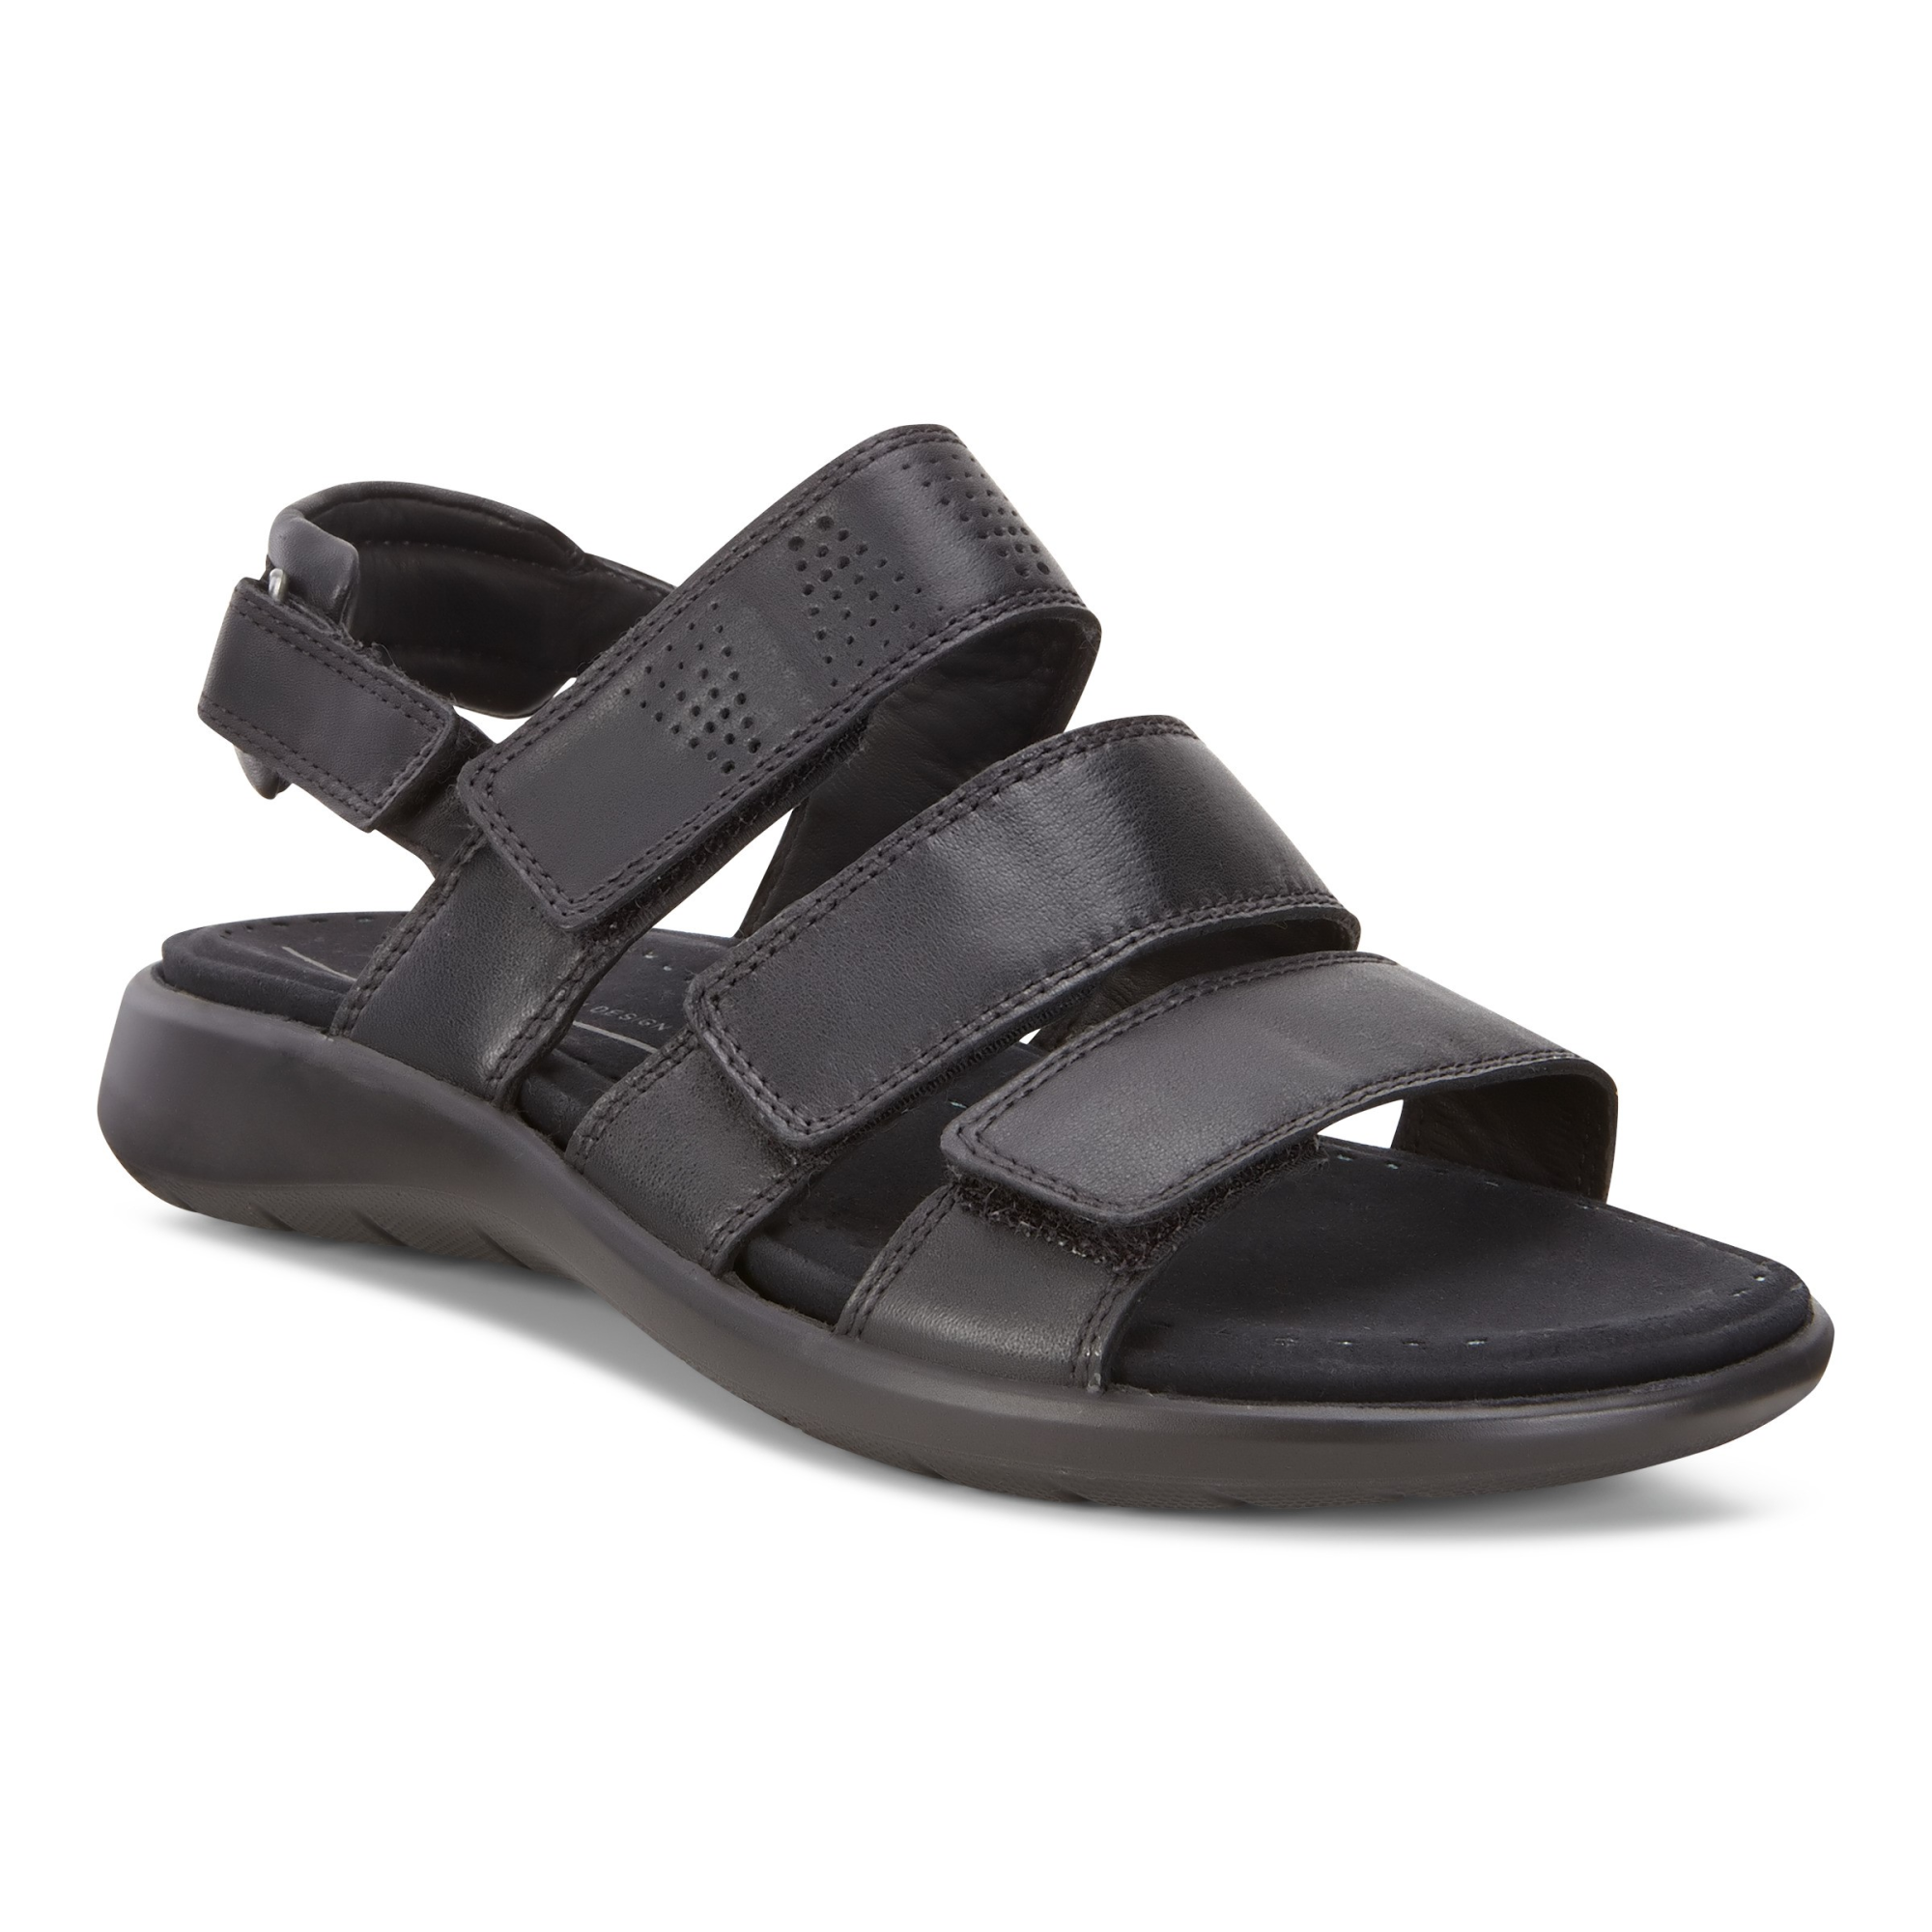 Ecco Soft 5 3-Strap Sandal - Products - Veryk Mall - Veryk Mall, many product, quick response, safe your